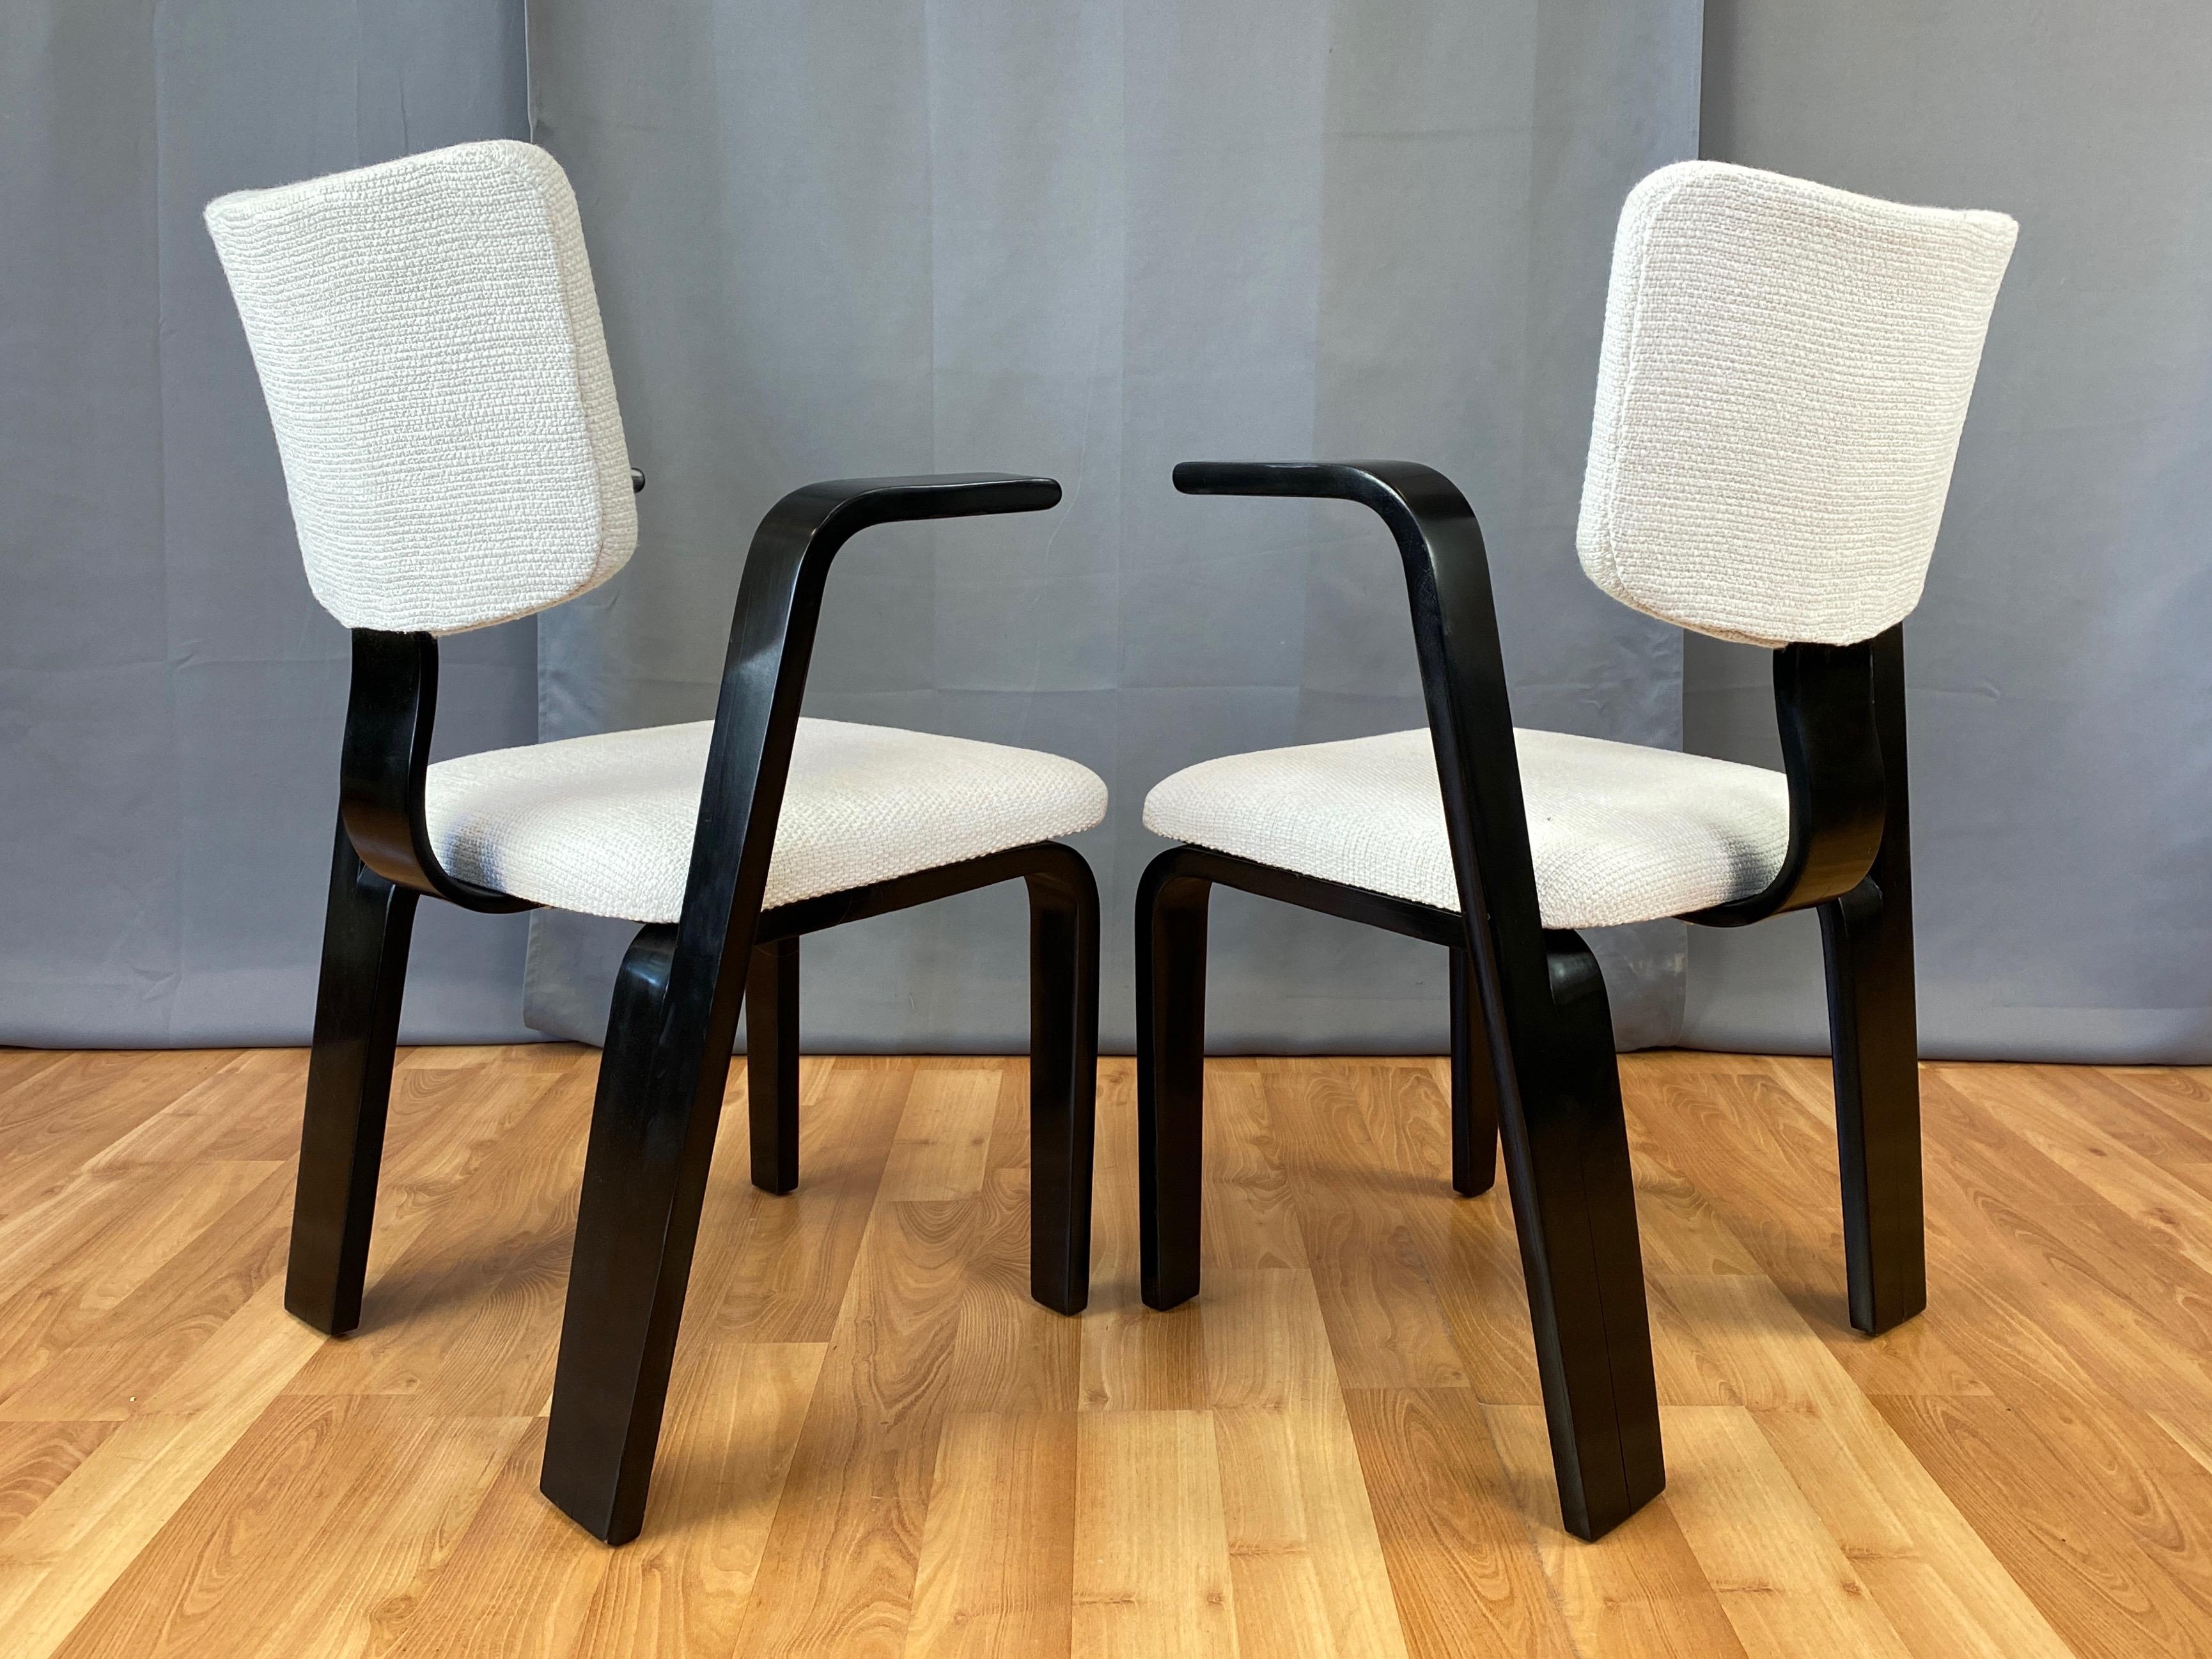 Mid-20th Century Pair of Thonet Black Lacquered Bentwood Armchairs with Upholstered Seats, 1940s For Sale